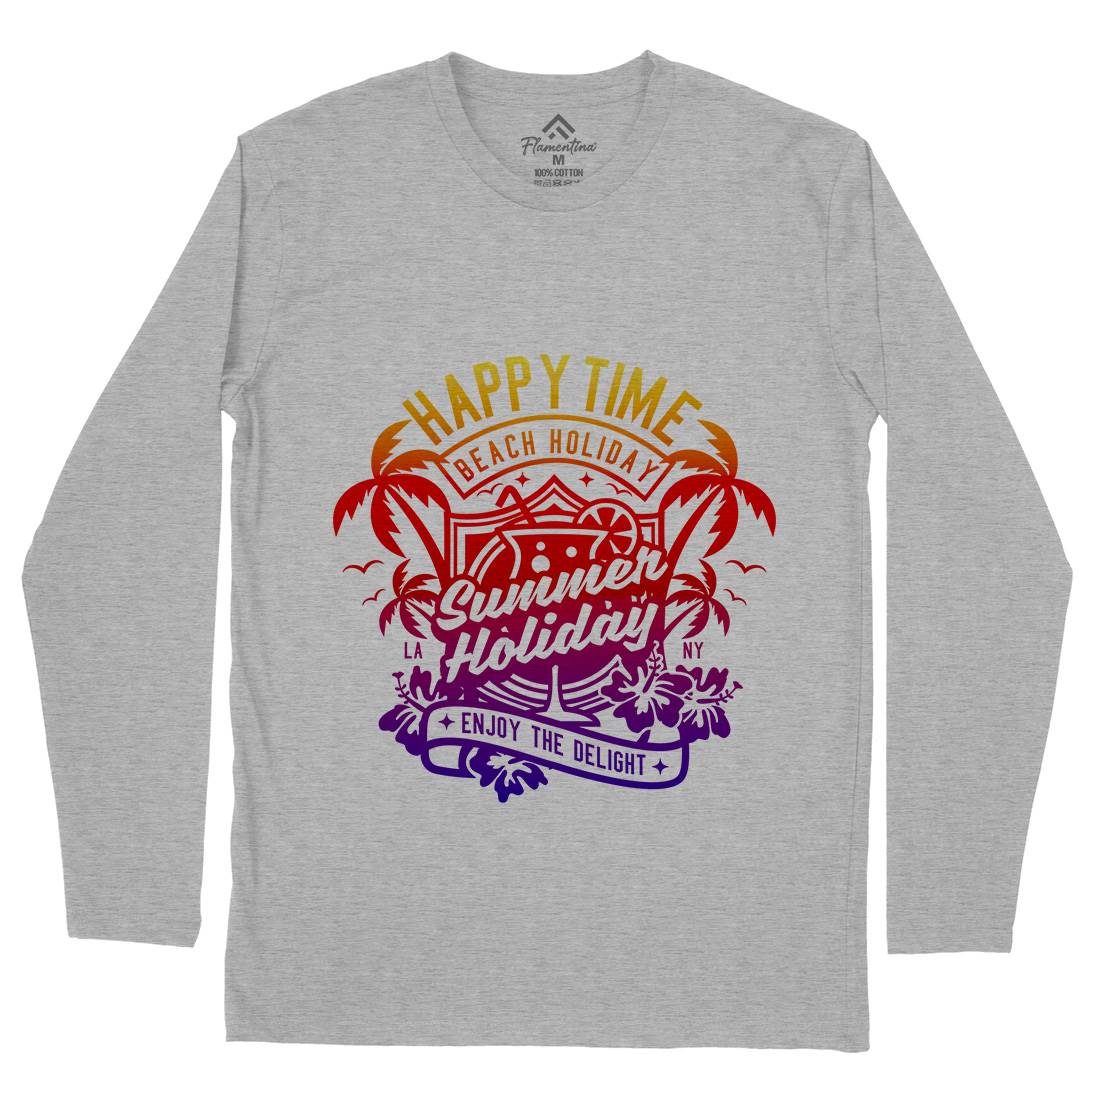 Happy Time Mens Long Sleeve T-Shirt Surf A238